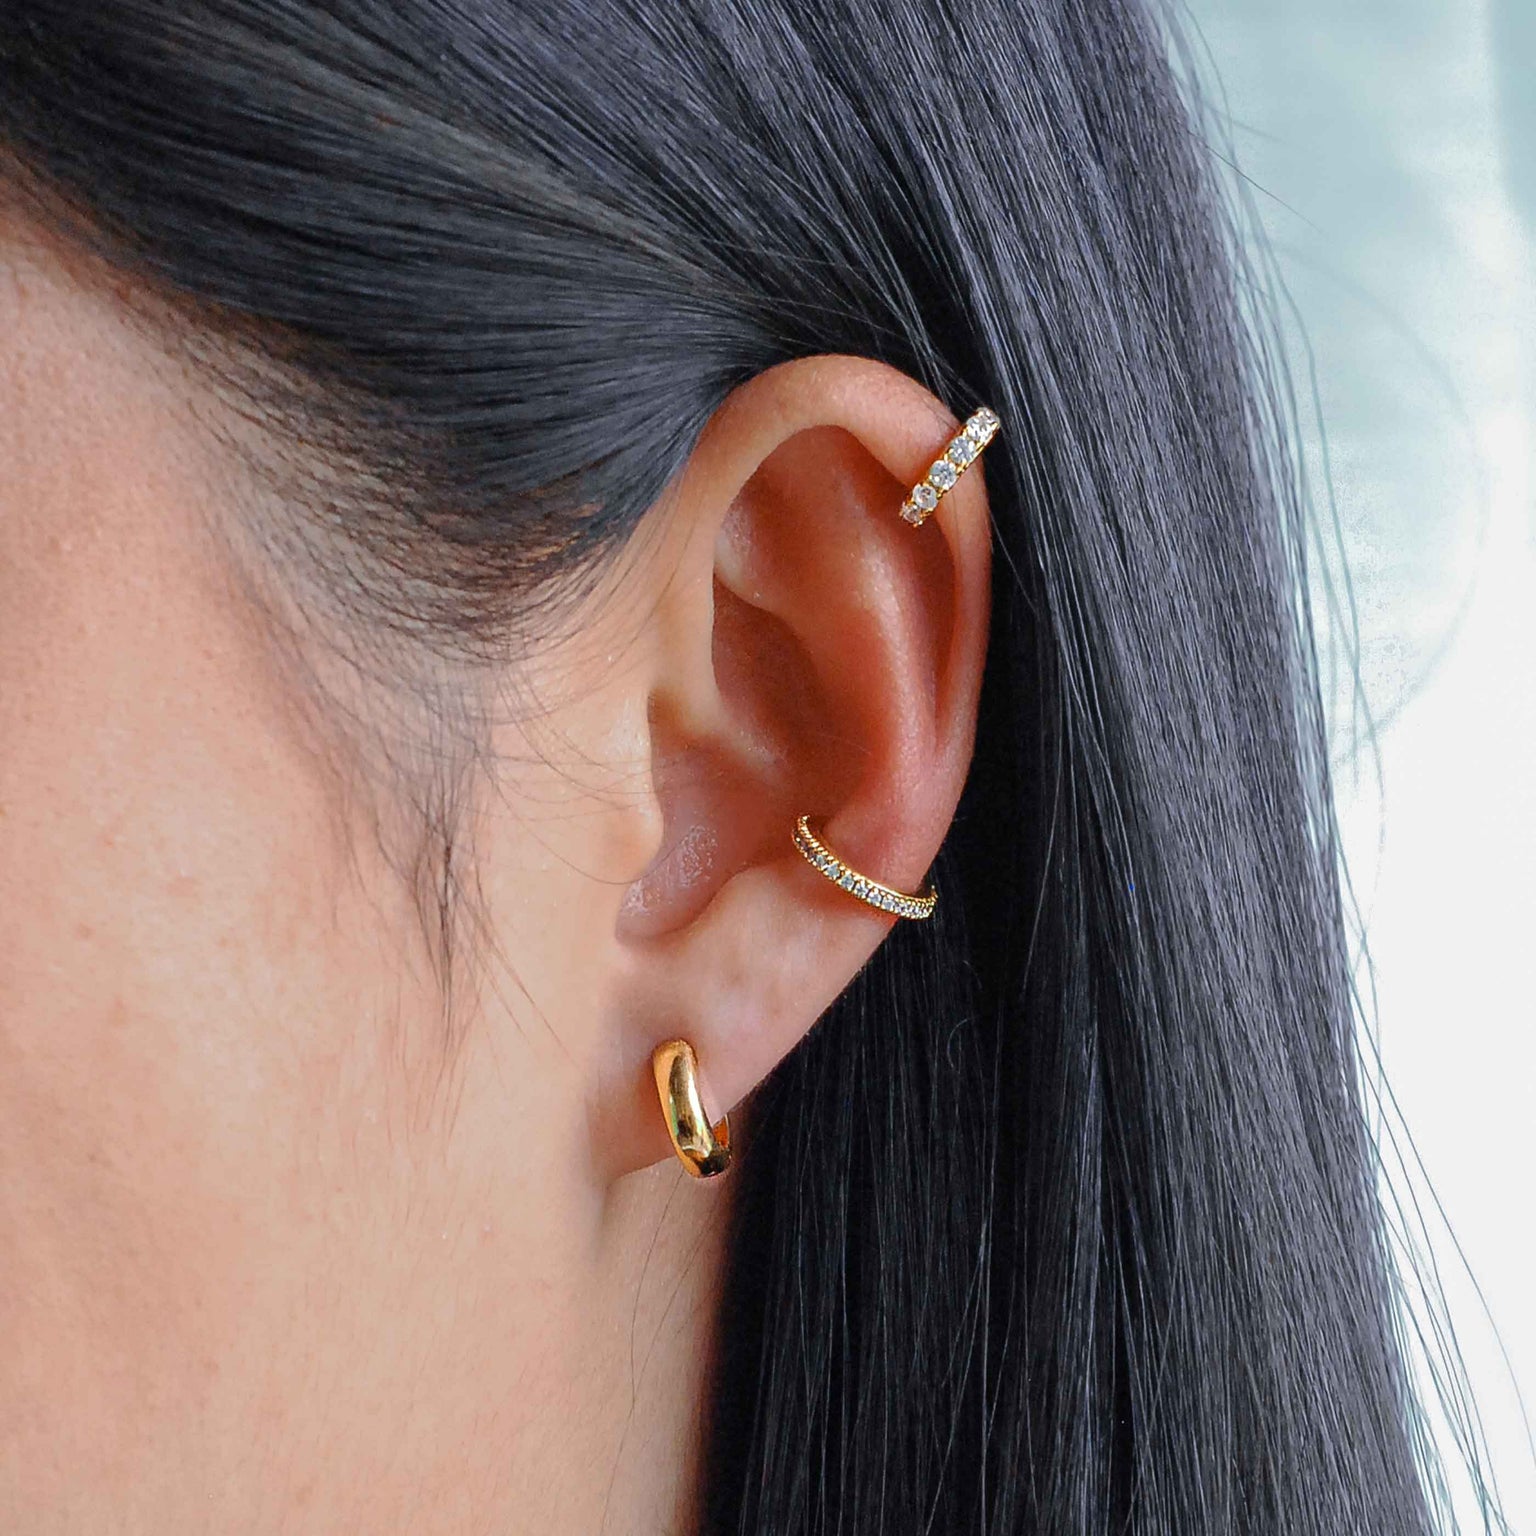 Crystal Ear Cuff in Gold worn with bold huggies in gold